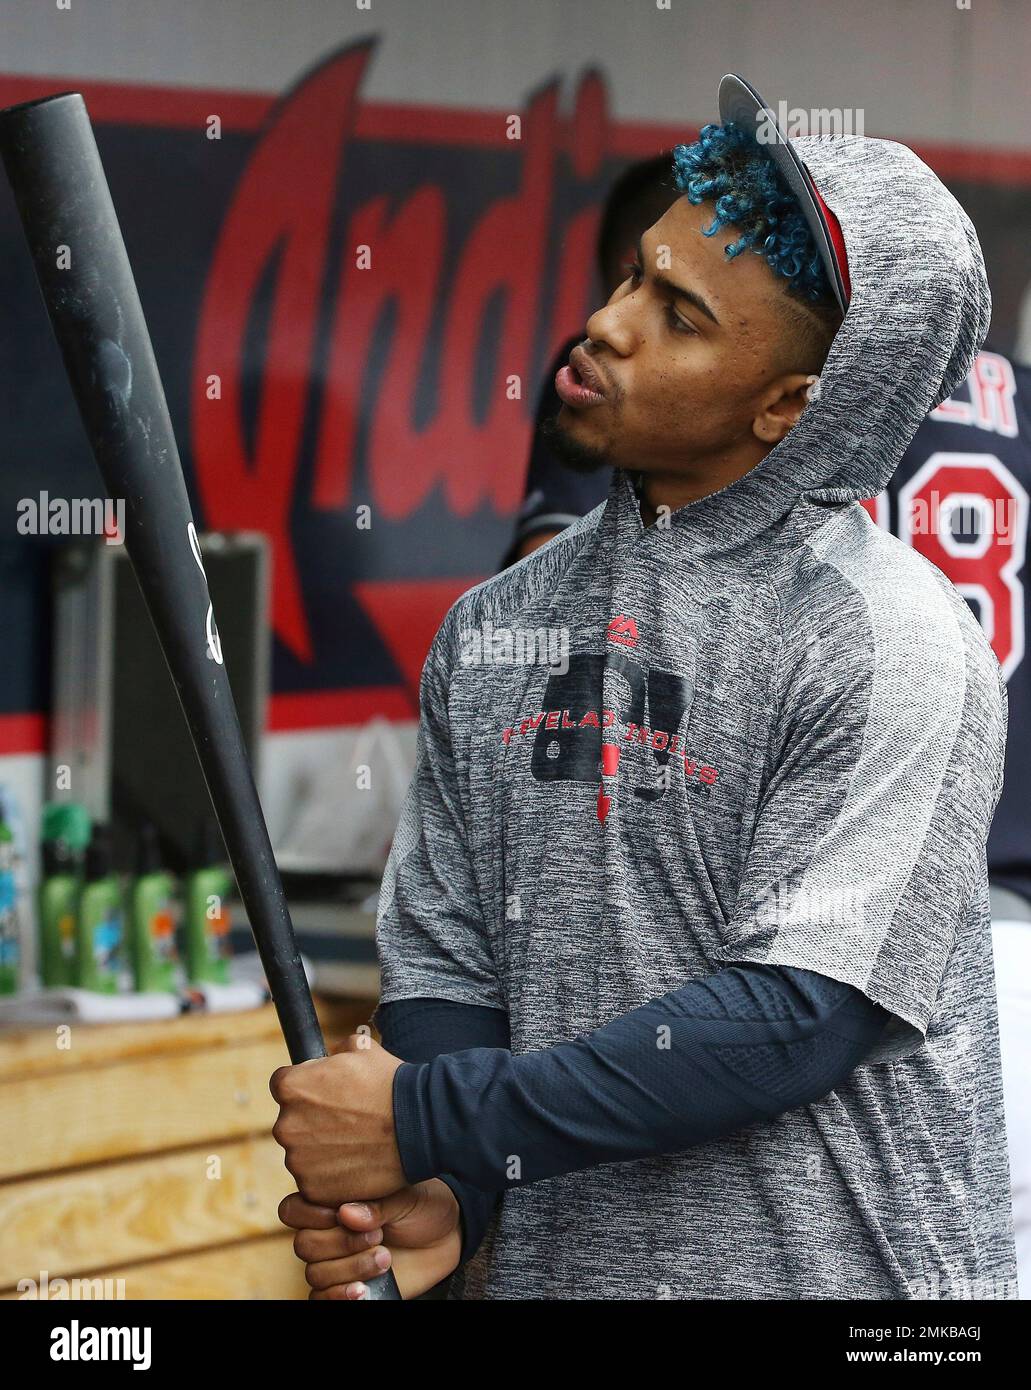 Cincinnati Reds talking to Cleveland about a Francisco Lindor